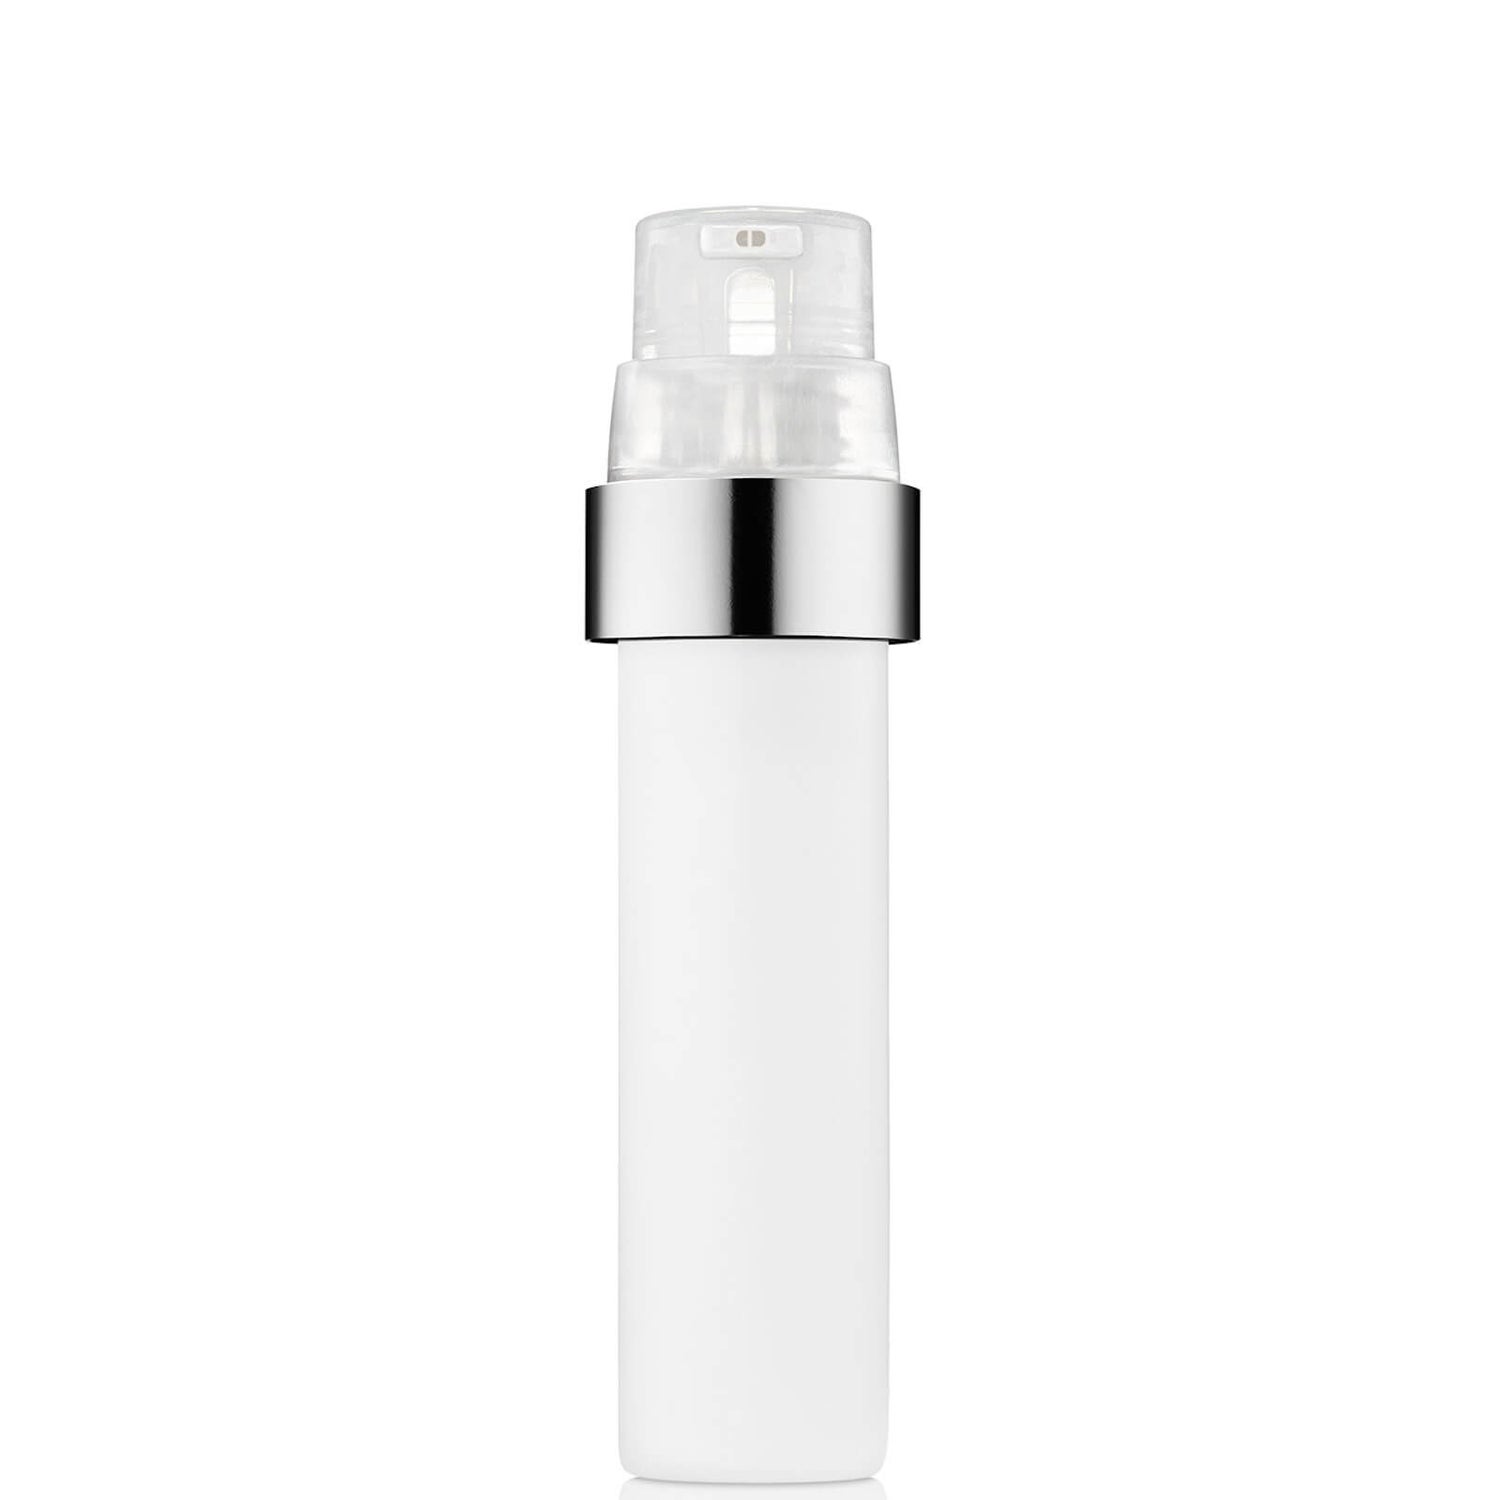 Clinique iD Active Cartridge Concentrate for Uneven Skin Tone koncentrat ujednolicający koloryt